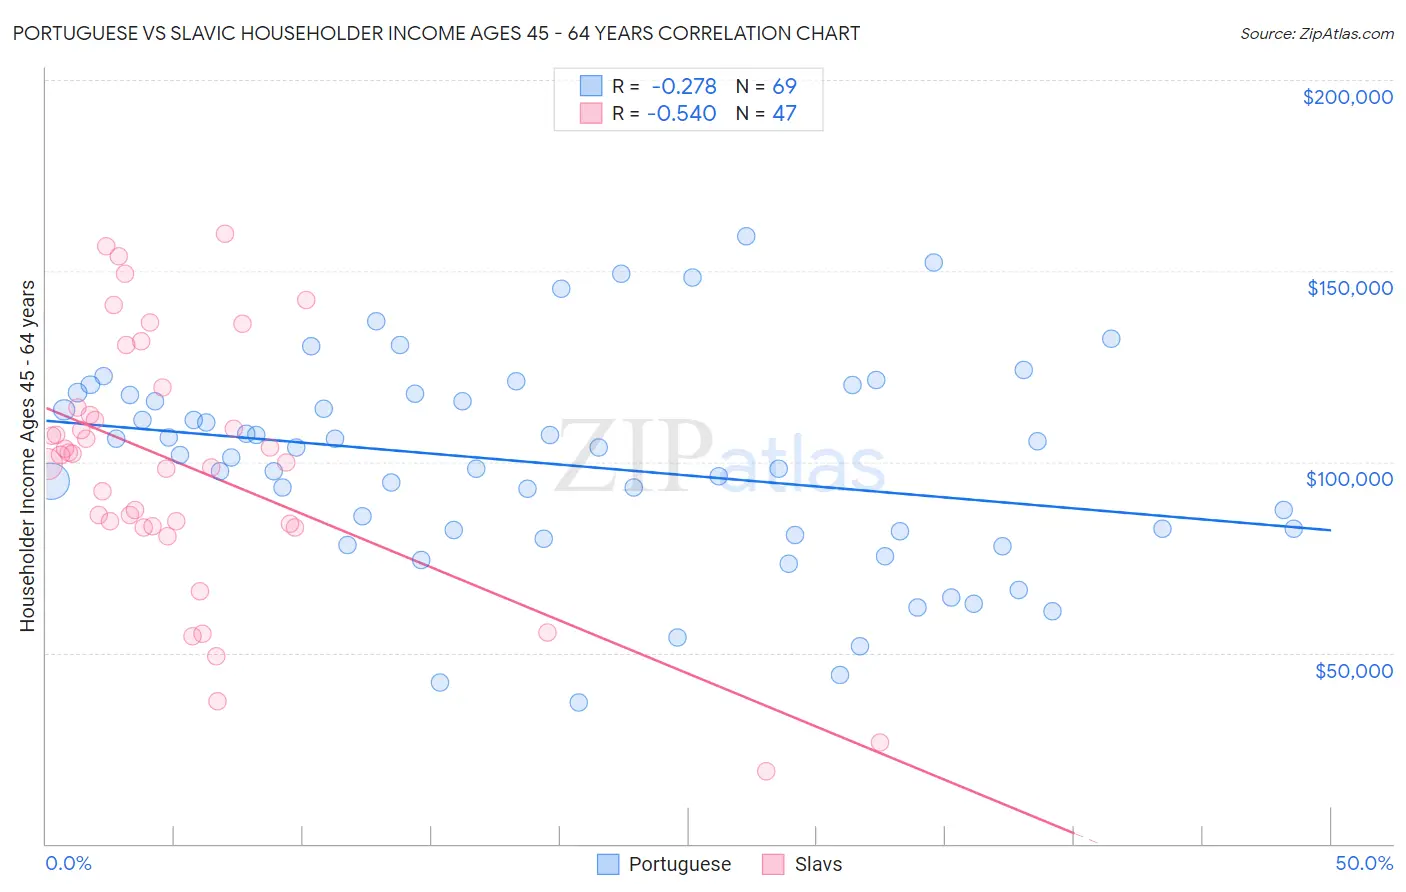 Portuguese vs Slavic Householder Income Ages 45 - 64 years